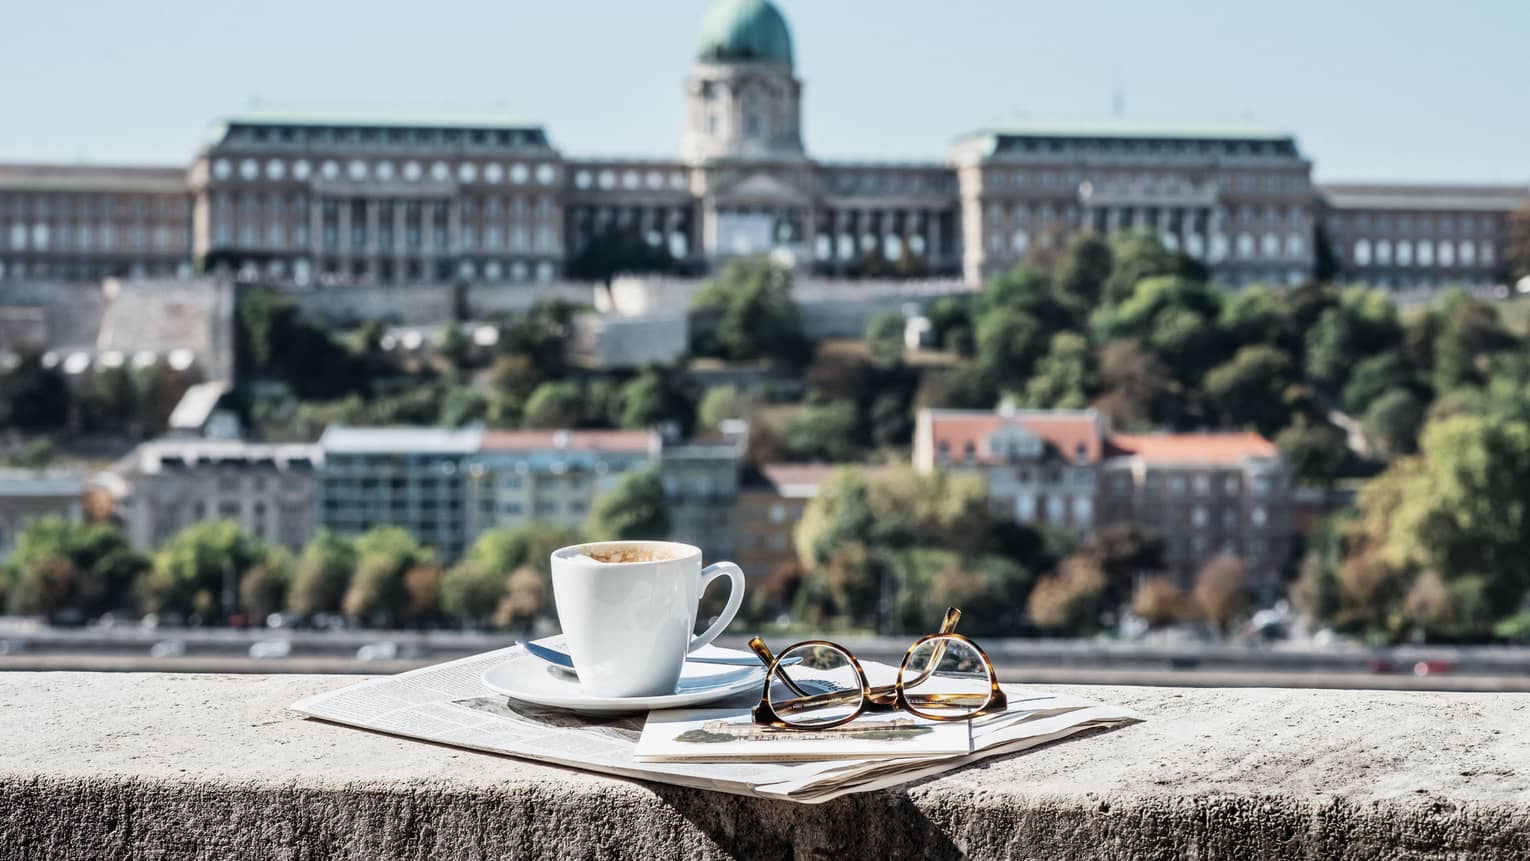 Morning view of Buda Castle from guest room terrace, cup of coffee, eyeglasses on rail